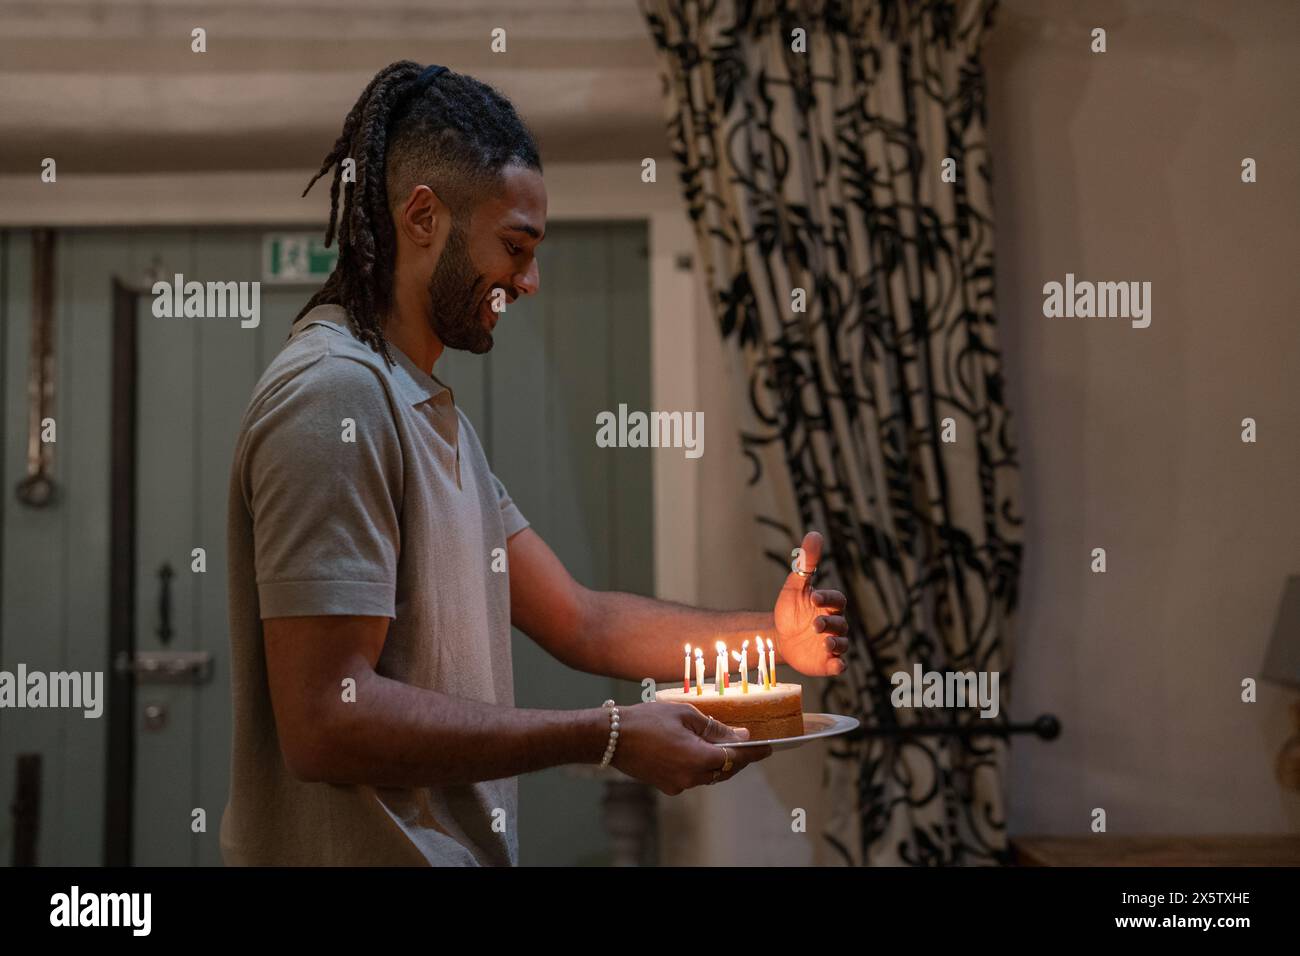 Man holds plate with birthday cake and candles Stock Photo